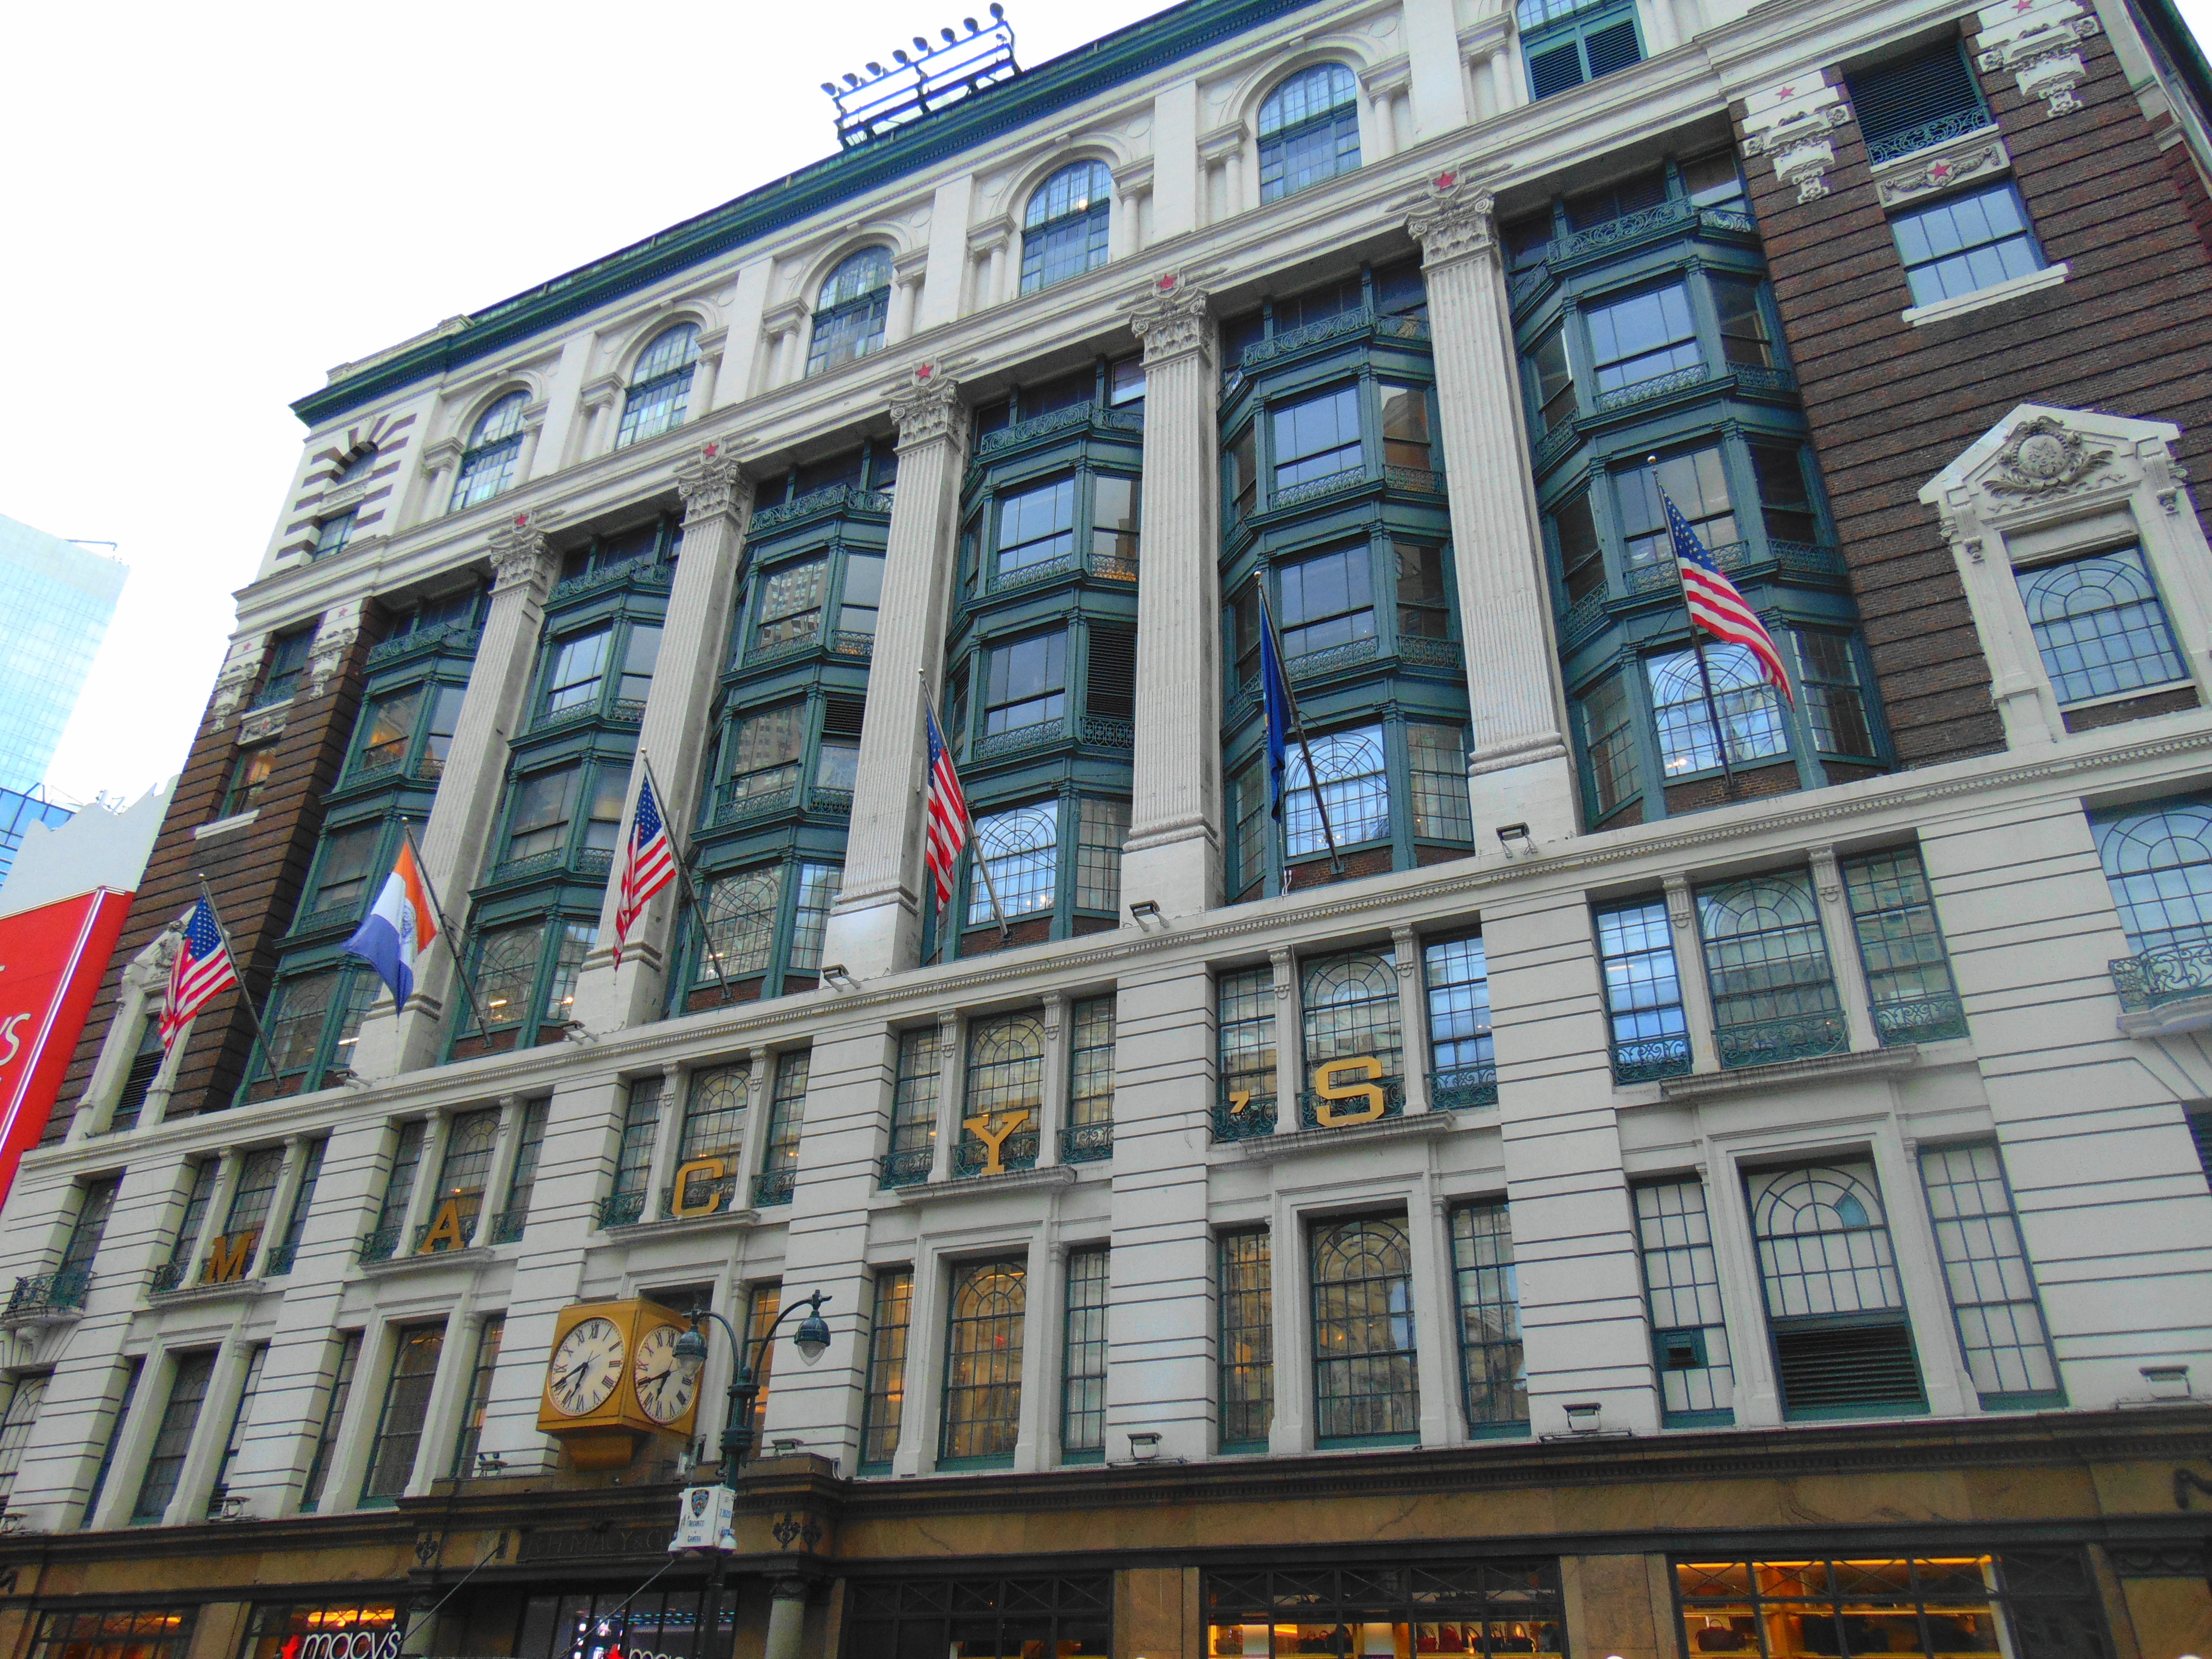 Exterior Photo of Macy's in Herald Square